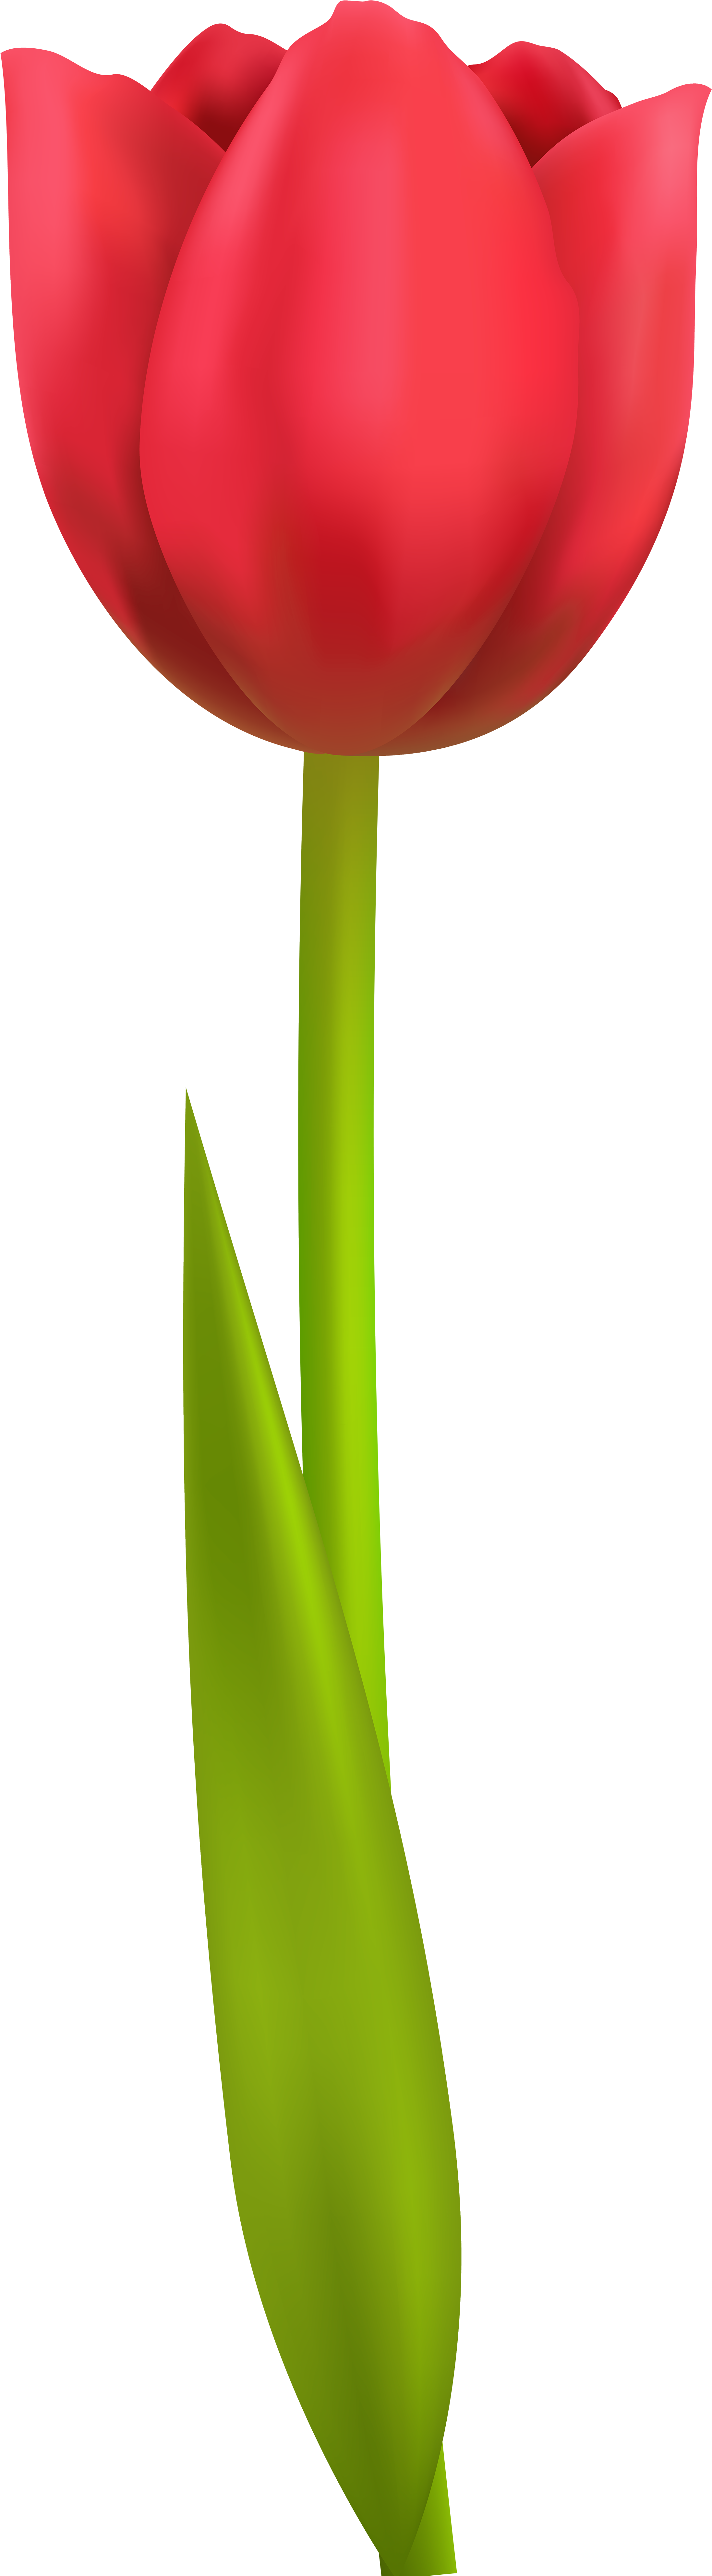 A Green Plant With A Black Background